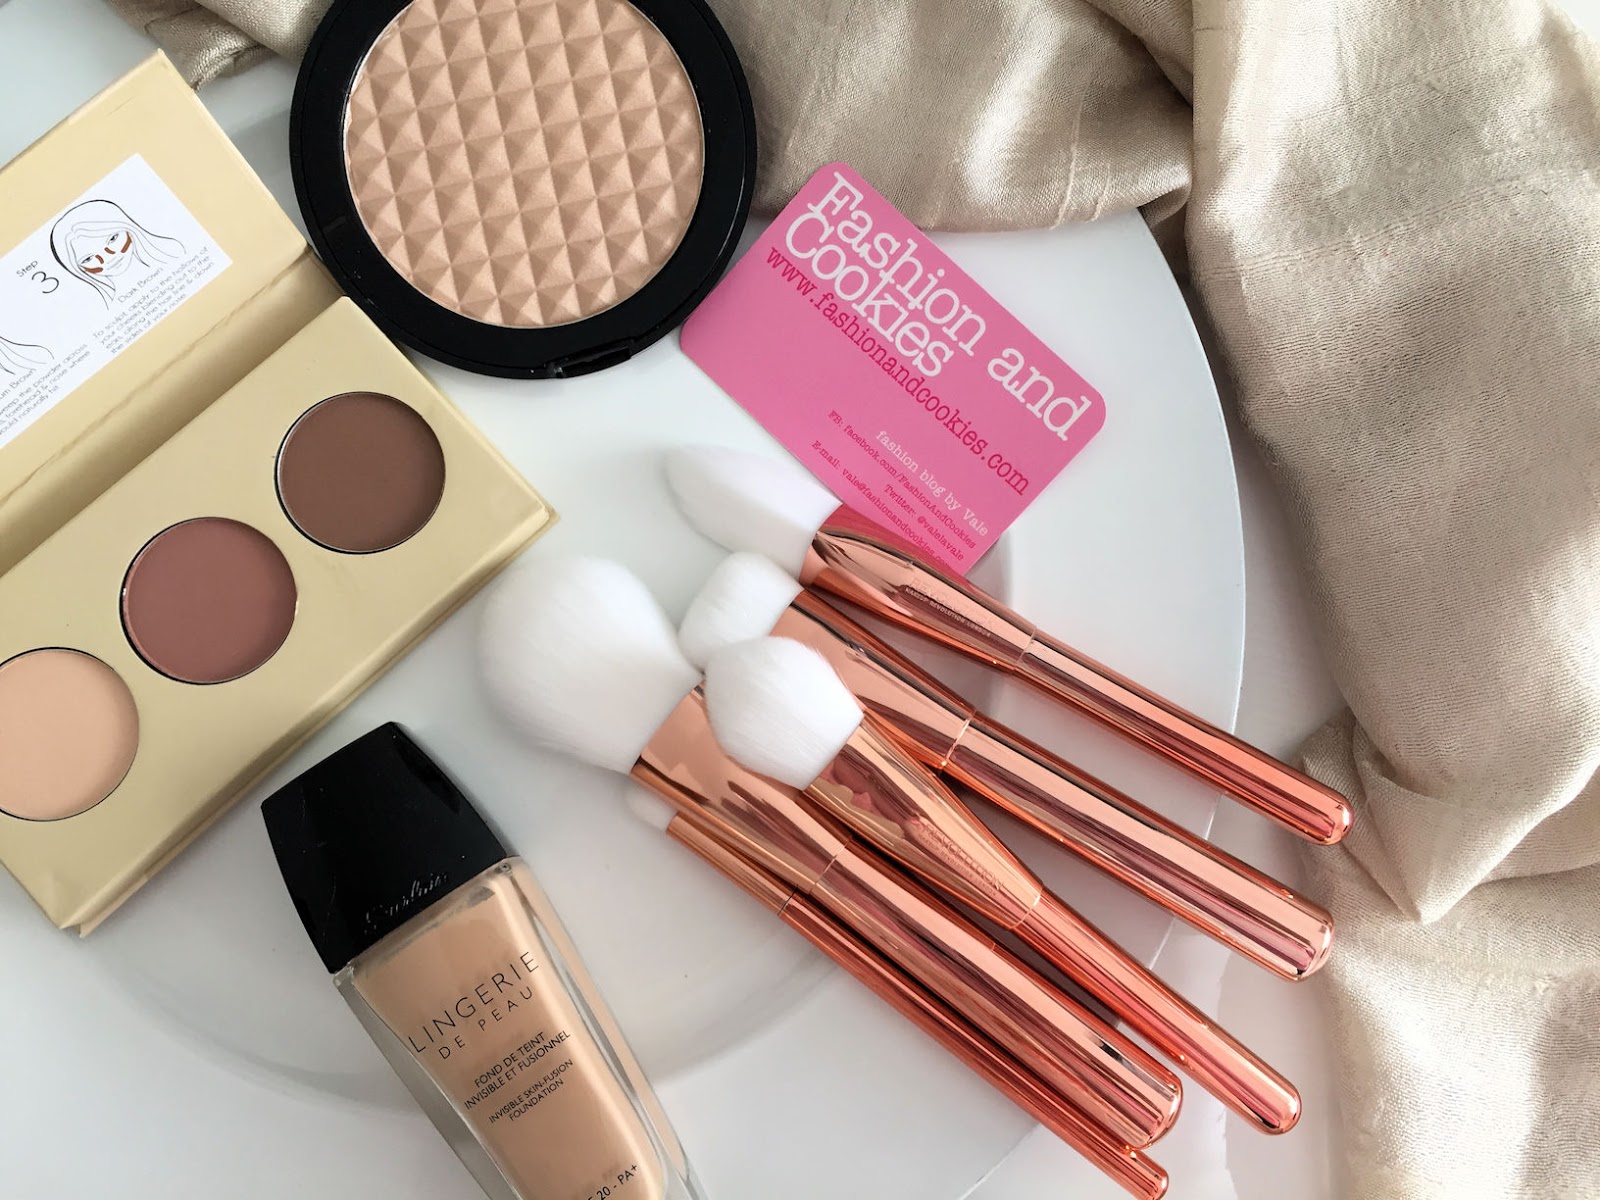 Makeup Revolution Ultra Metals Revolution makeup brushes review on Fashion and Cookies beauty blog, beauty blogger